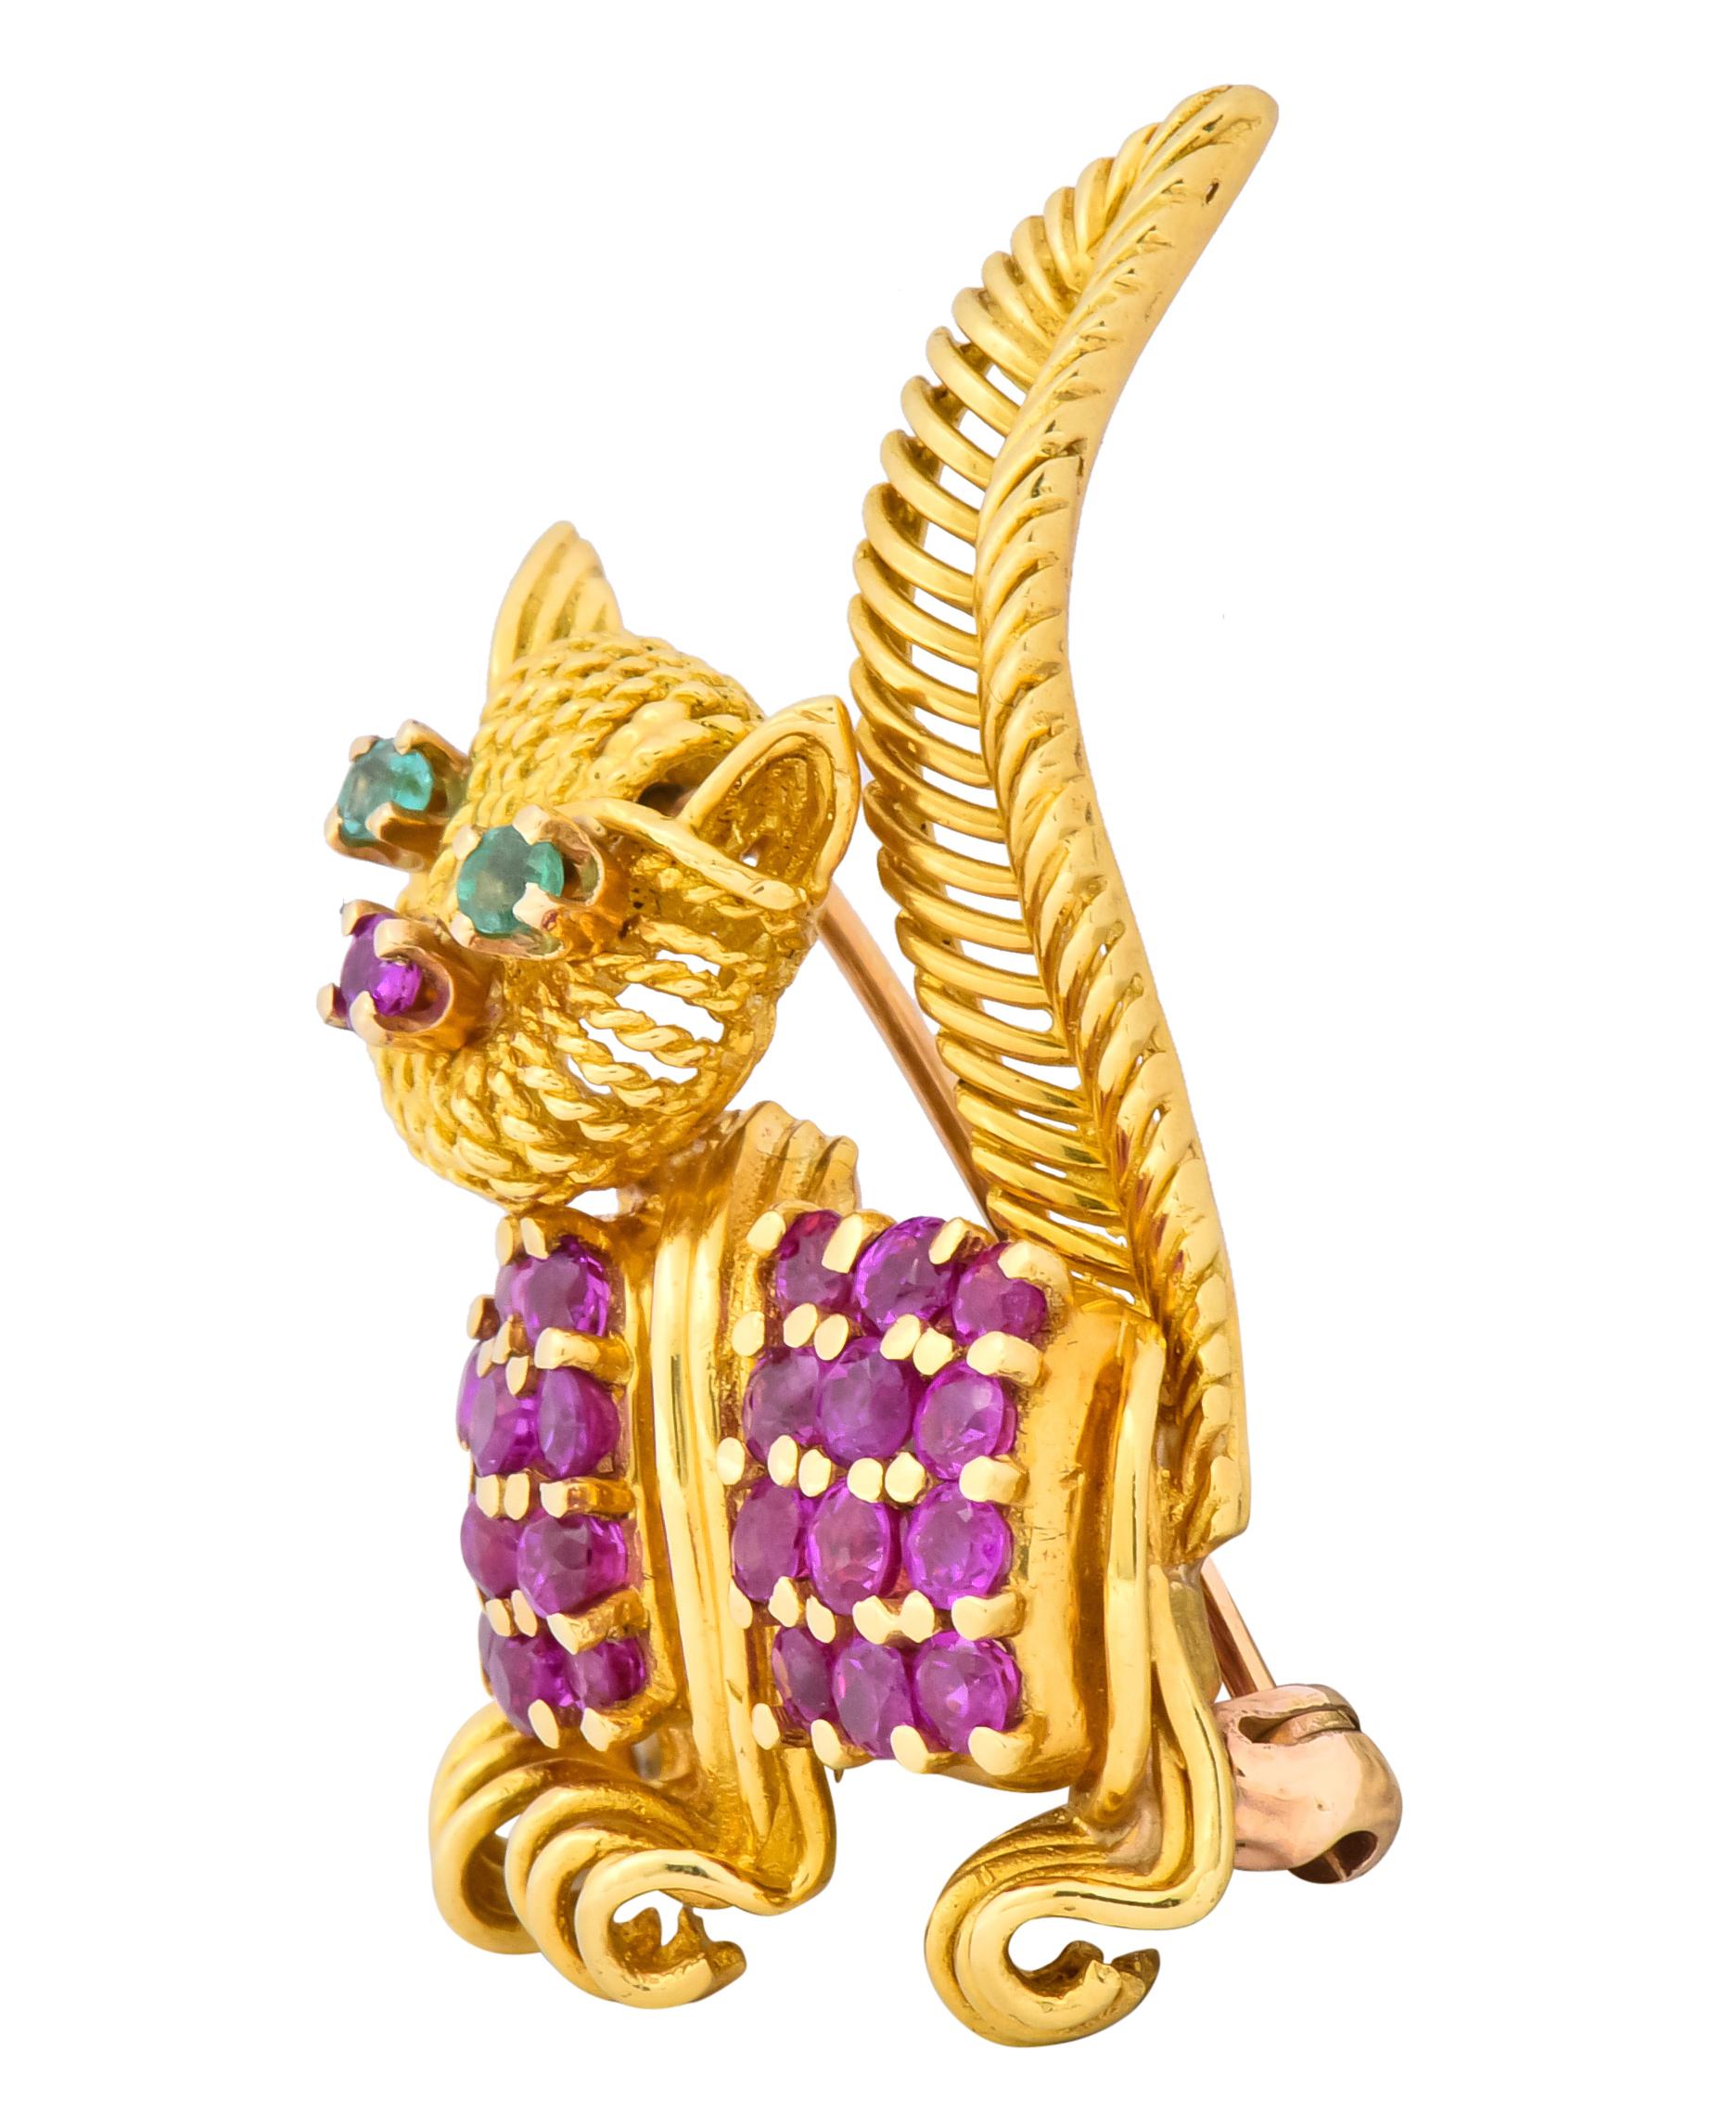 Brooch designed as a prancing cat with textured fur and whiskers 

With high polished and ribbed detailing on face, tail and nails

Set throughout with 1.50 carats of rubies, transparent and raspberry red in color

Accented by round cut emerald eyes